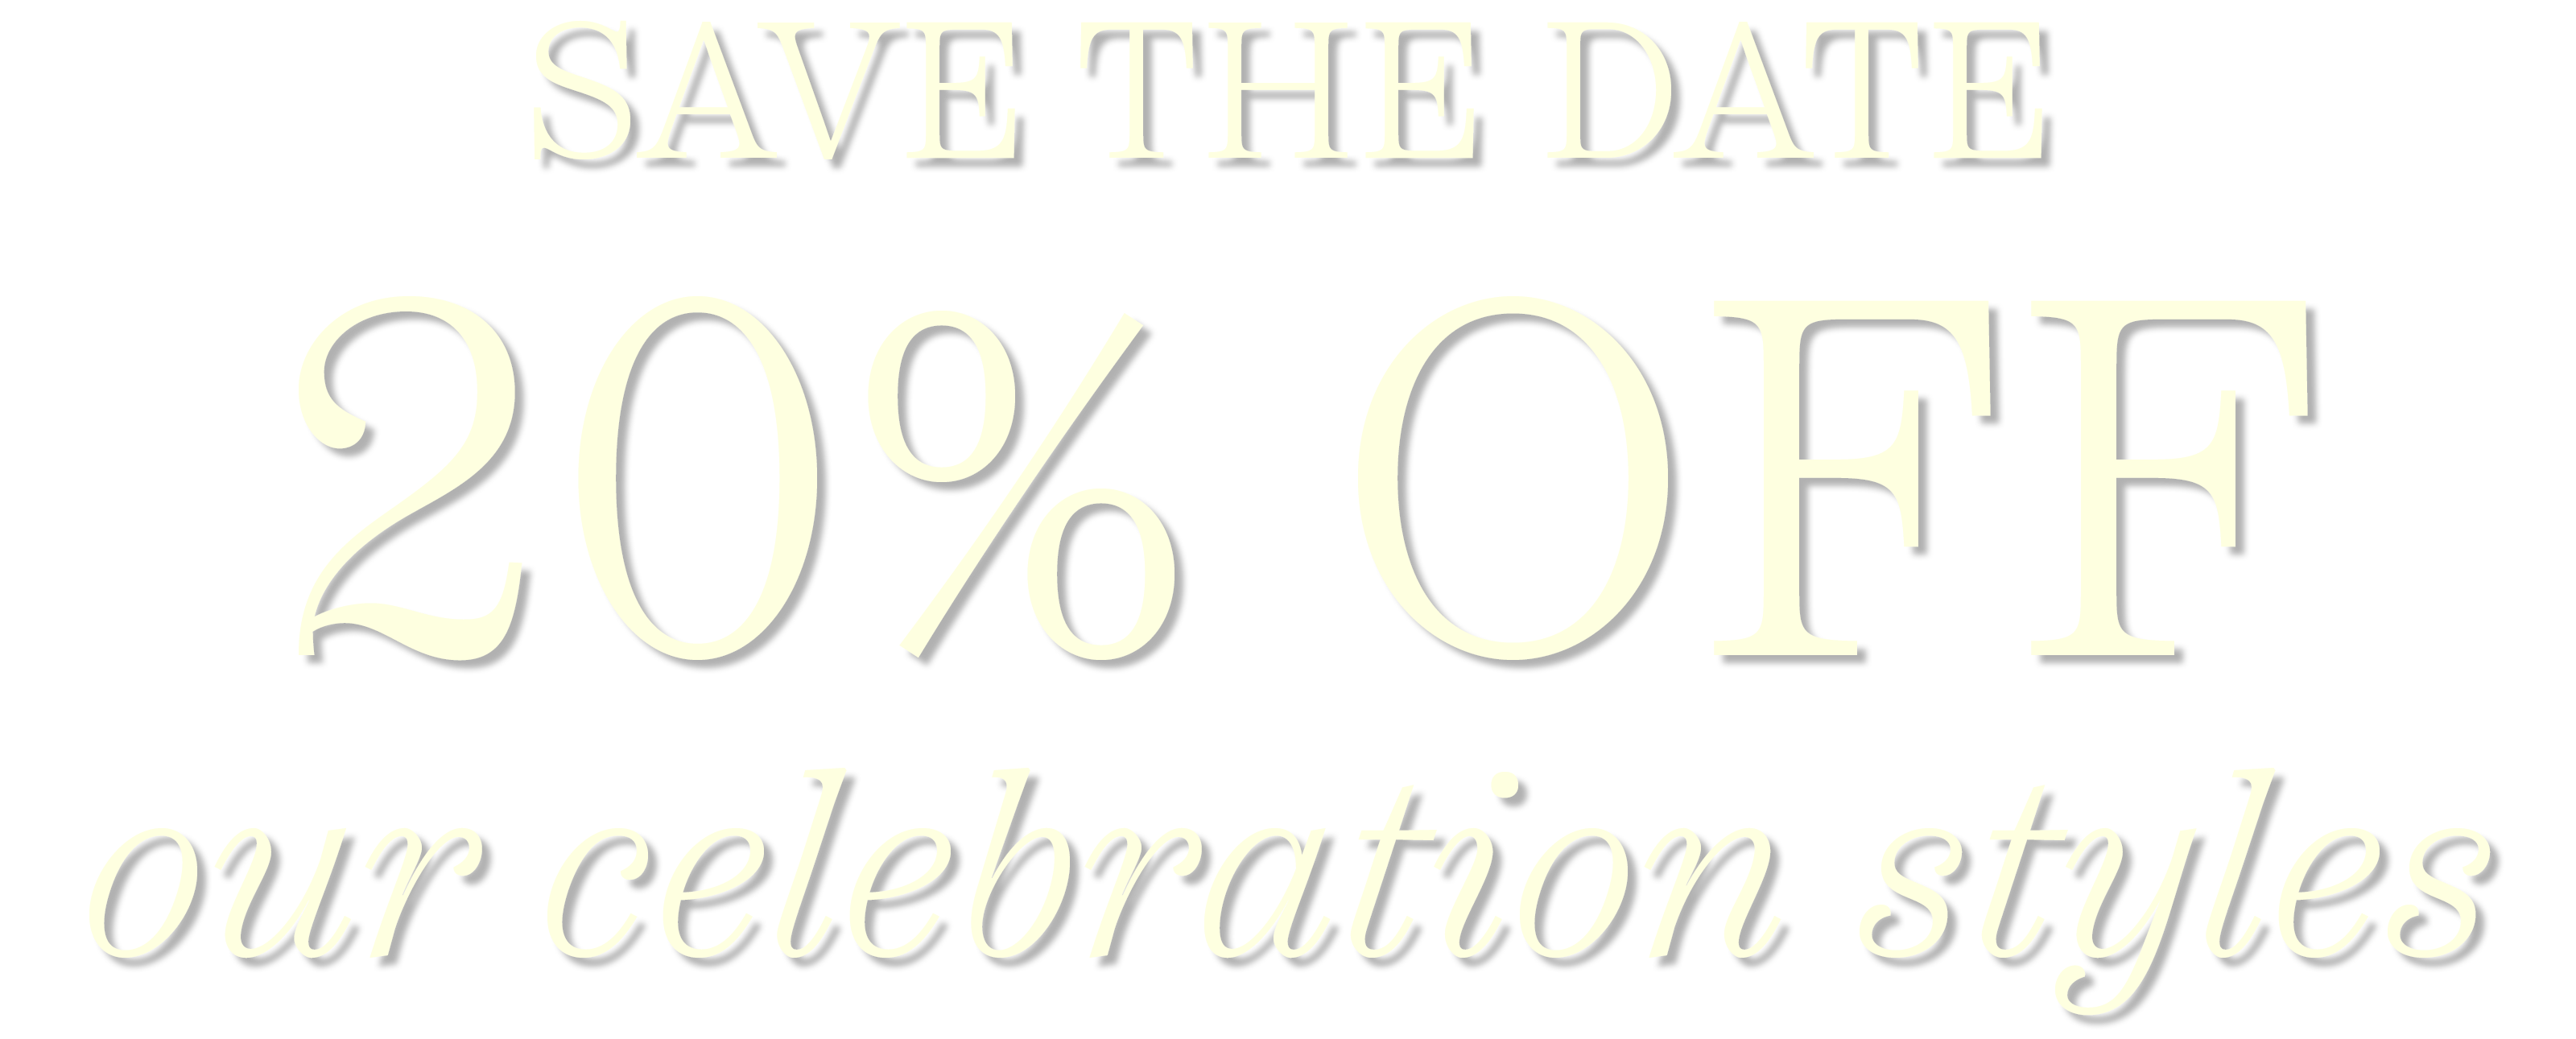 Save the Date. 20% OFF our celebration styles.